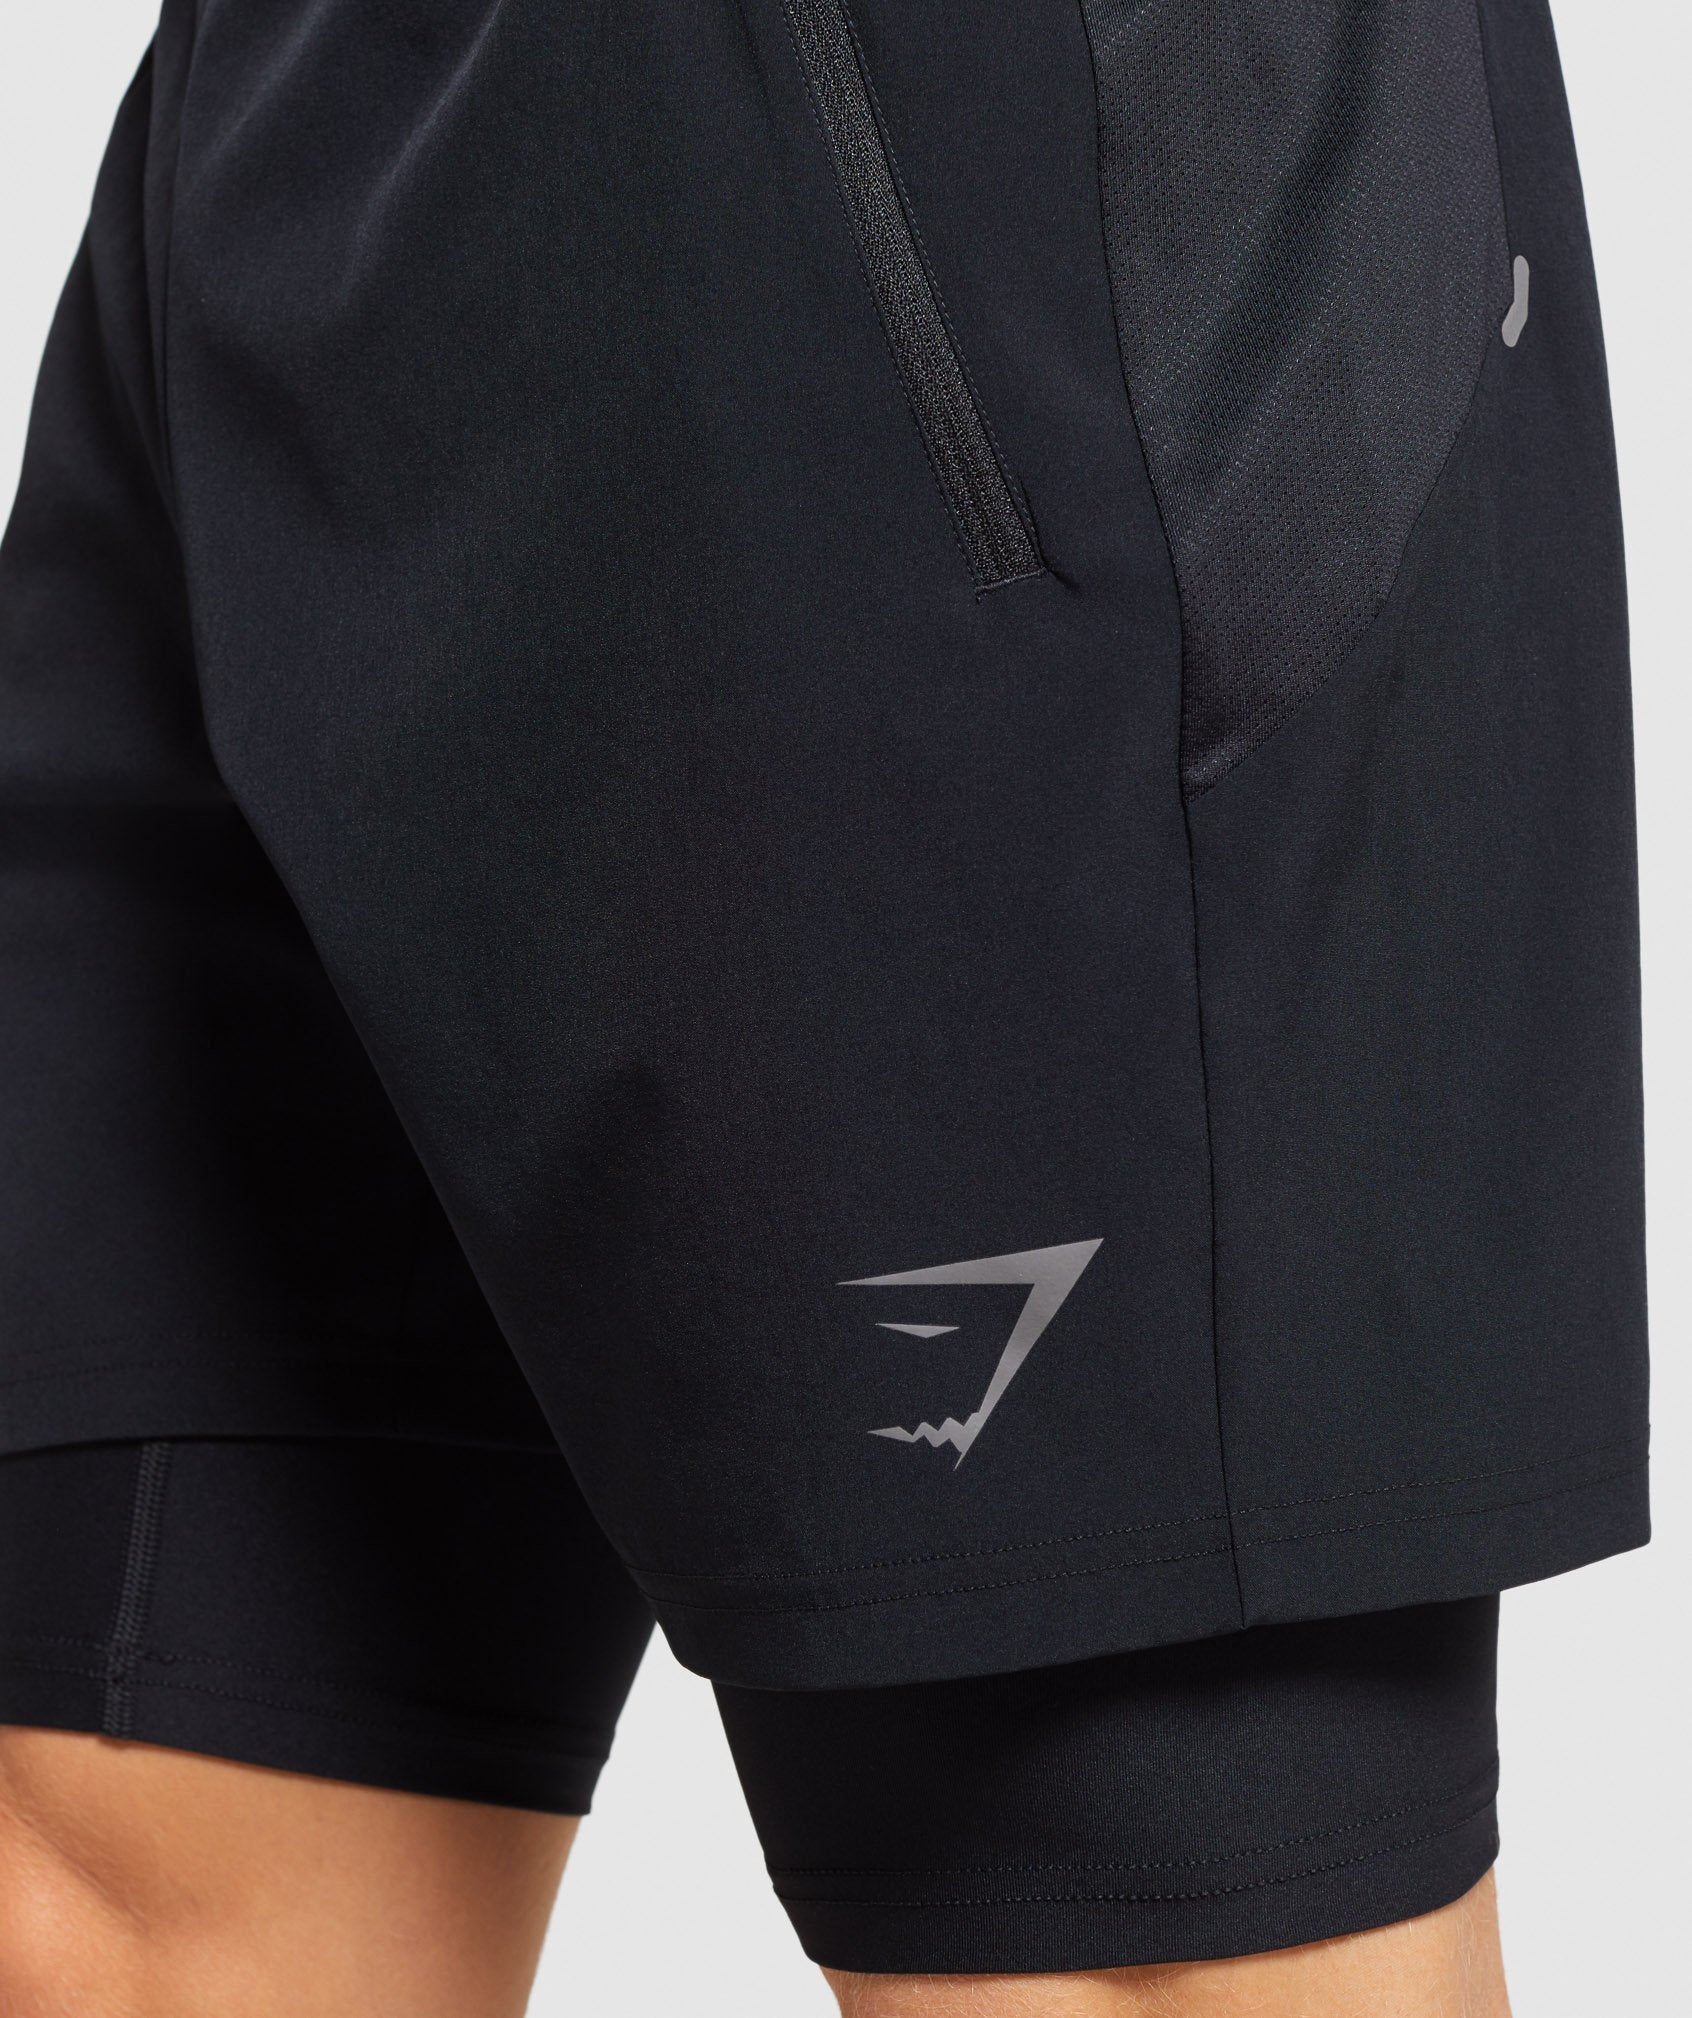 Element Hiit 2 in 1 Shorts in Black - view 5